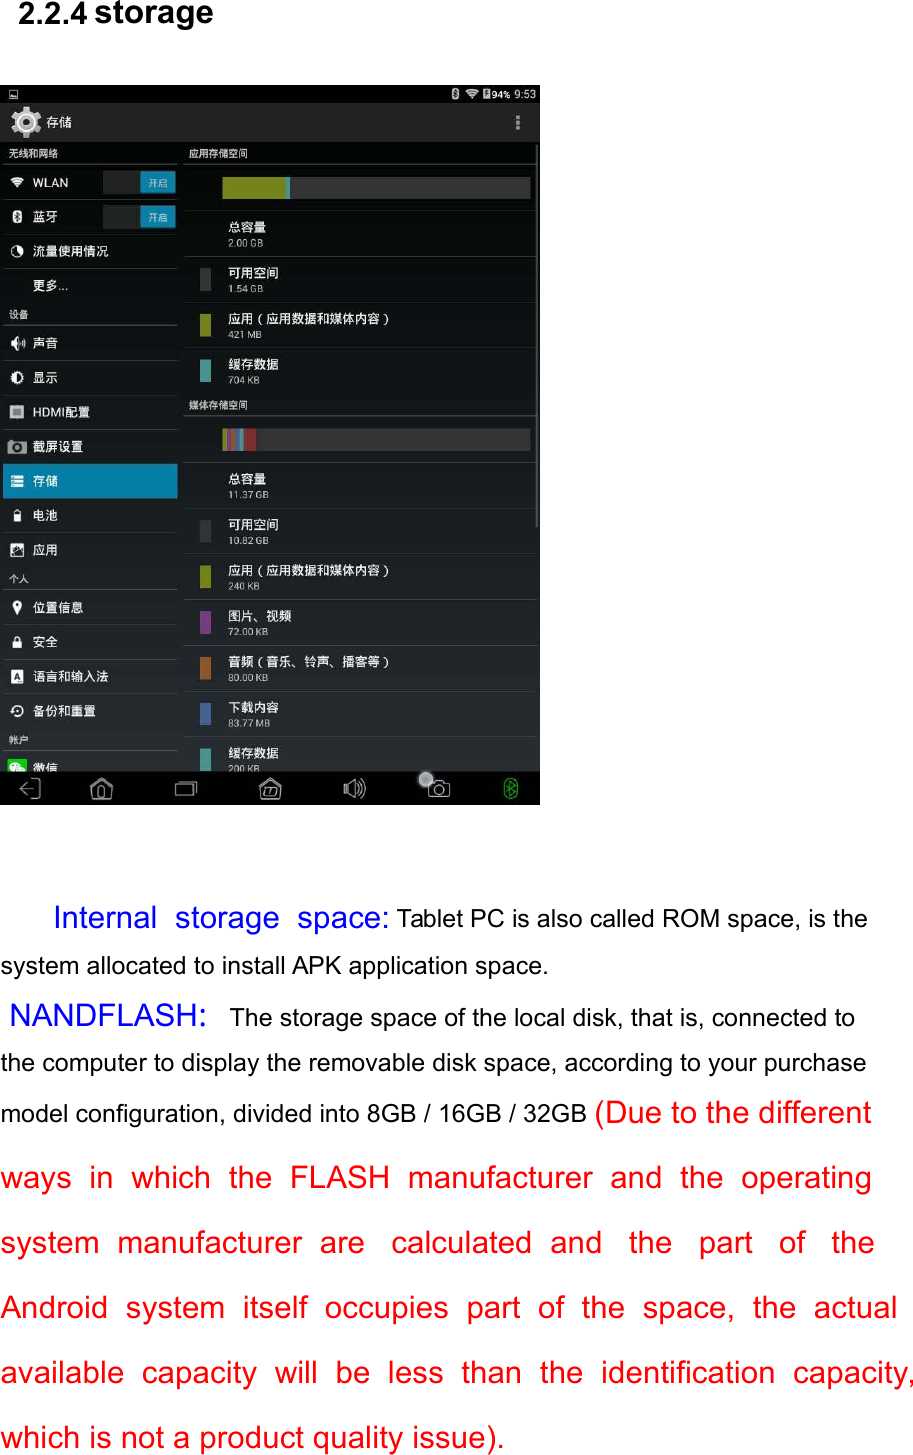   2.2.4 storage    Internal  storage  space:   Tablet PC is also called ROM space, is the system allocated to install APK application space.  NANDFLASH:The storage space of the local disk, that is, connected to the computer to display the removable disk space, according to your purchase model configuration, divided into 8GB / 16GB / 32GB (Due to the different ways  in  which  the  FLASH  manufacturer  and  the  operating system  manufacturer  are   calculated  and   the   part   of   the  Android  system  itself  occupies  part  of  the  space,  the  actual available  capacity  will  be  less  than  the  identification  capacity, which is not a product quality issue). 